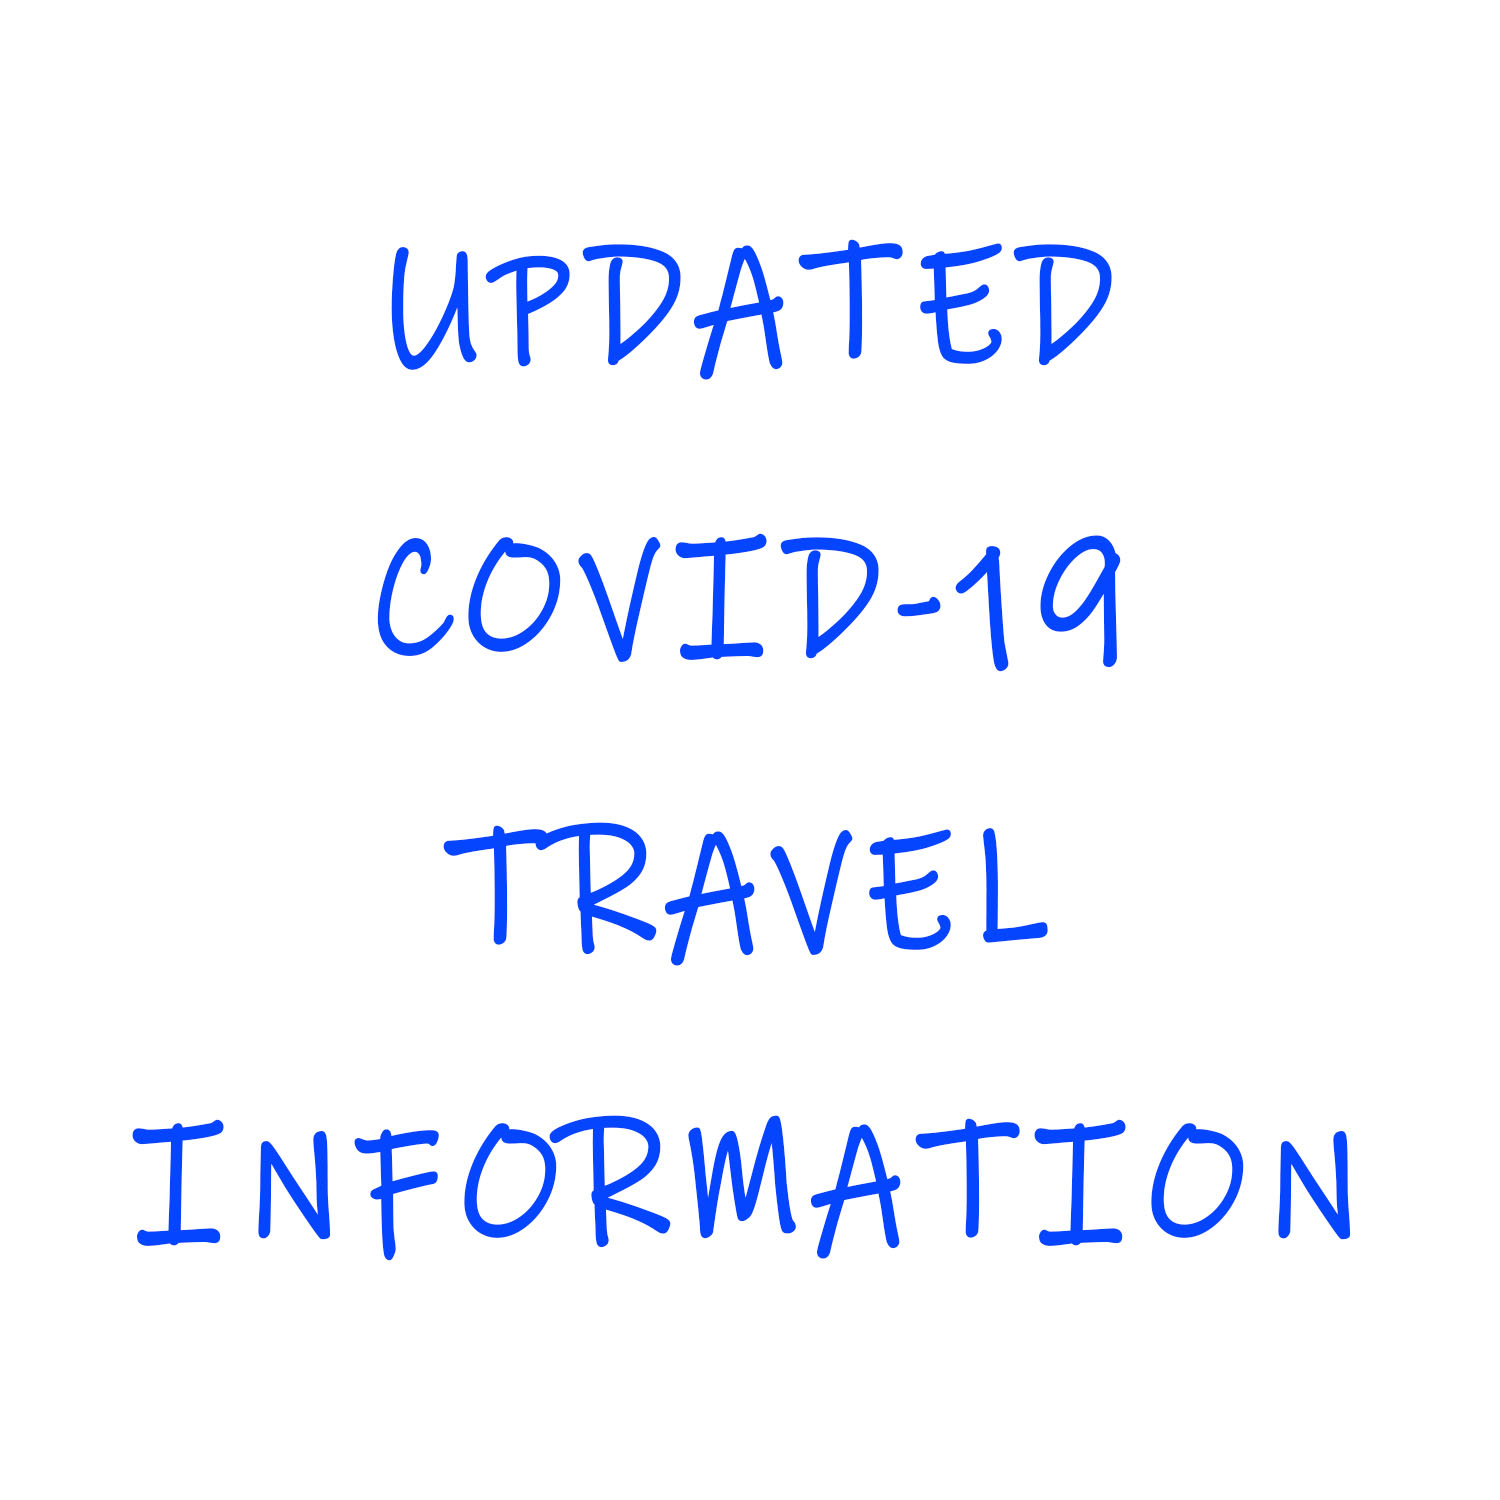 Updated Covid-19 Travel Information